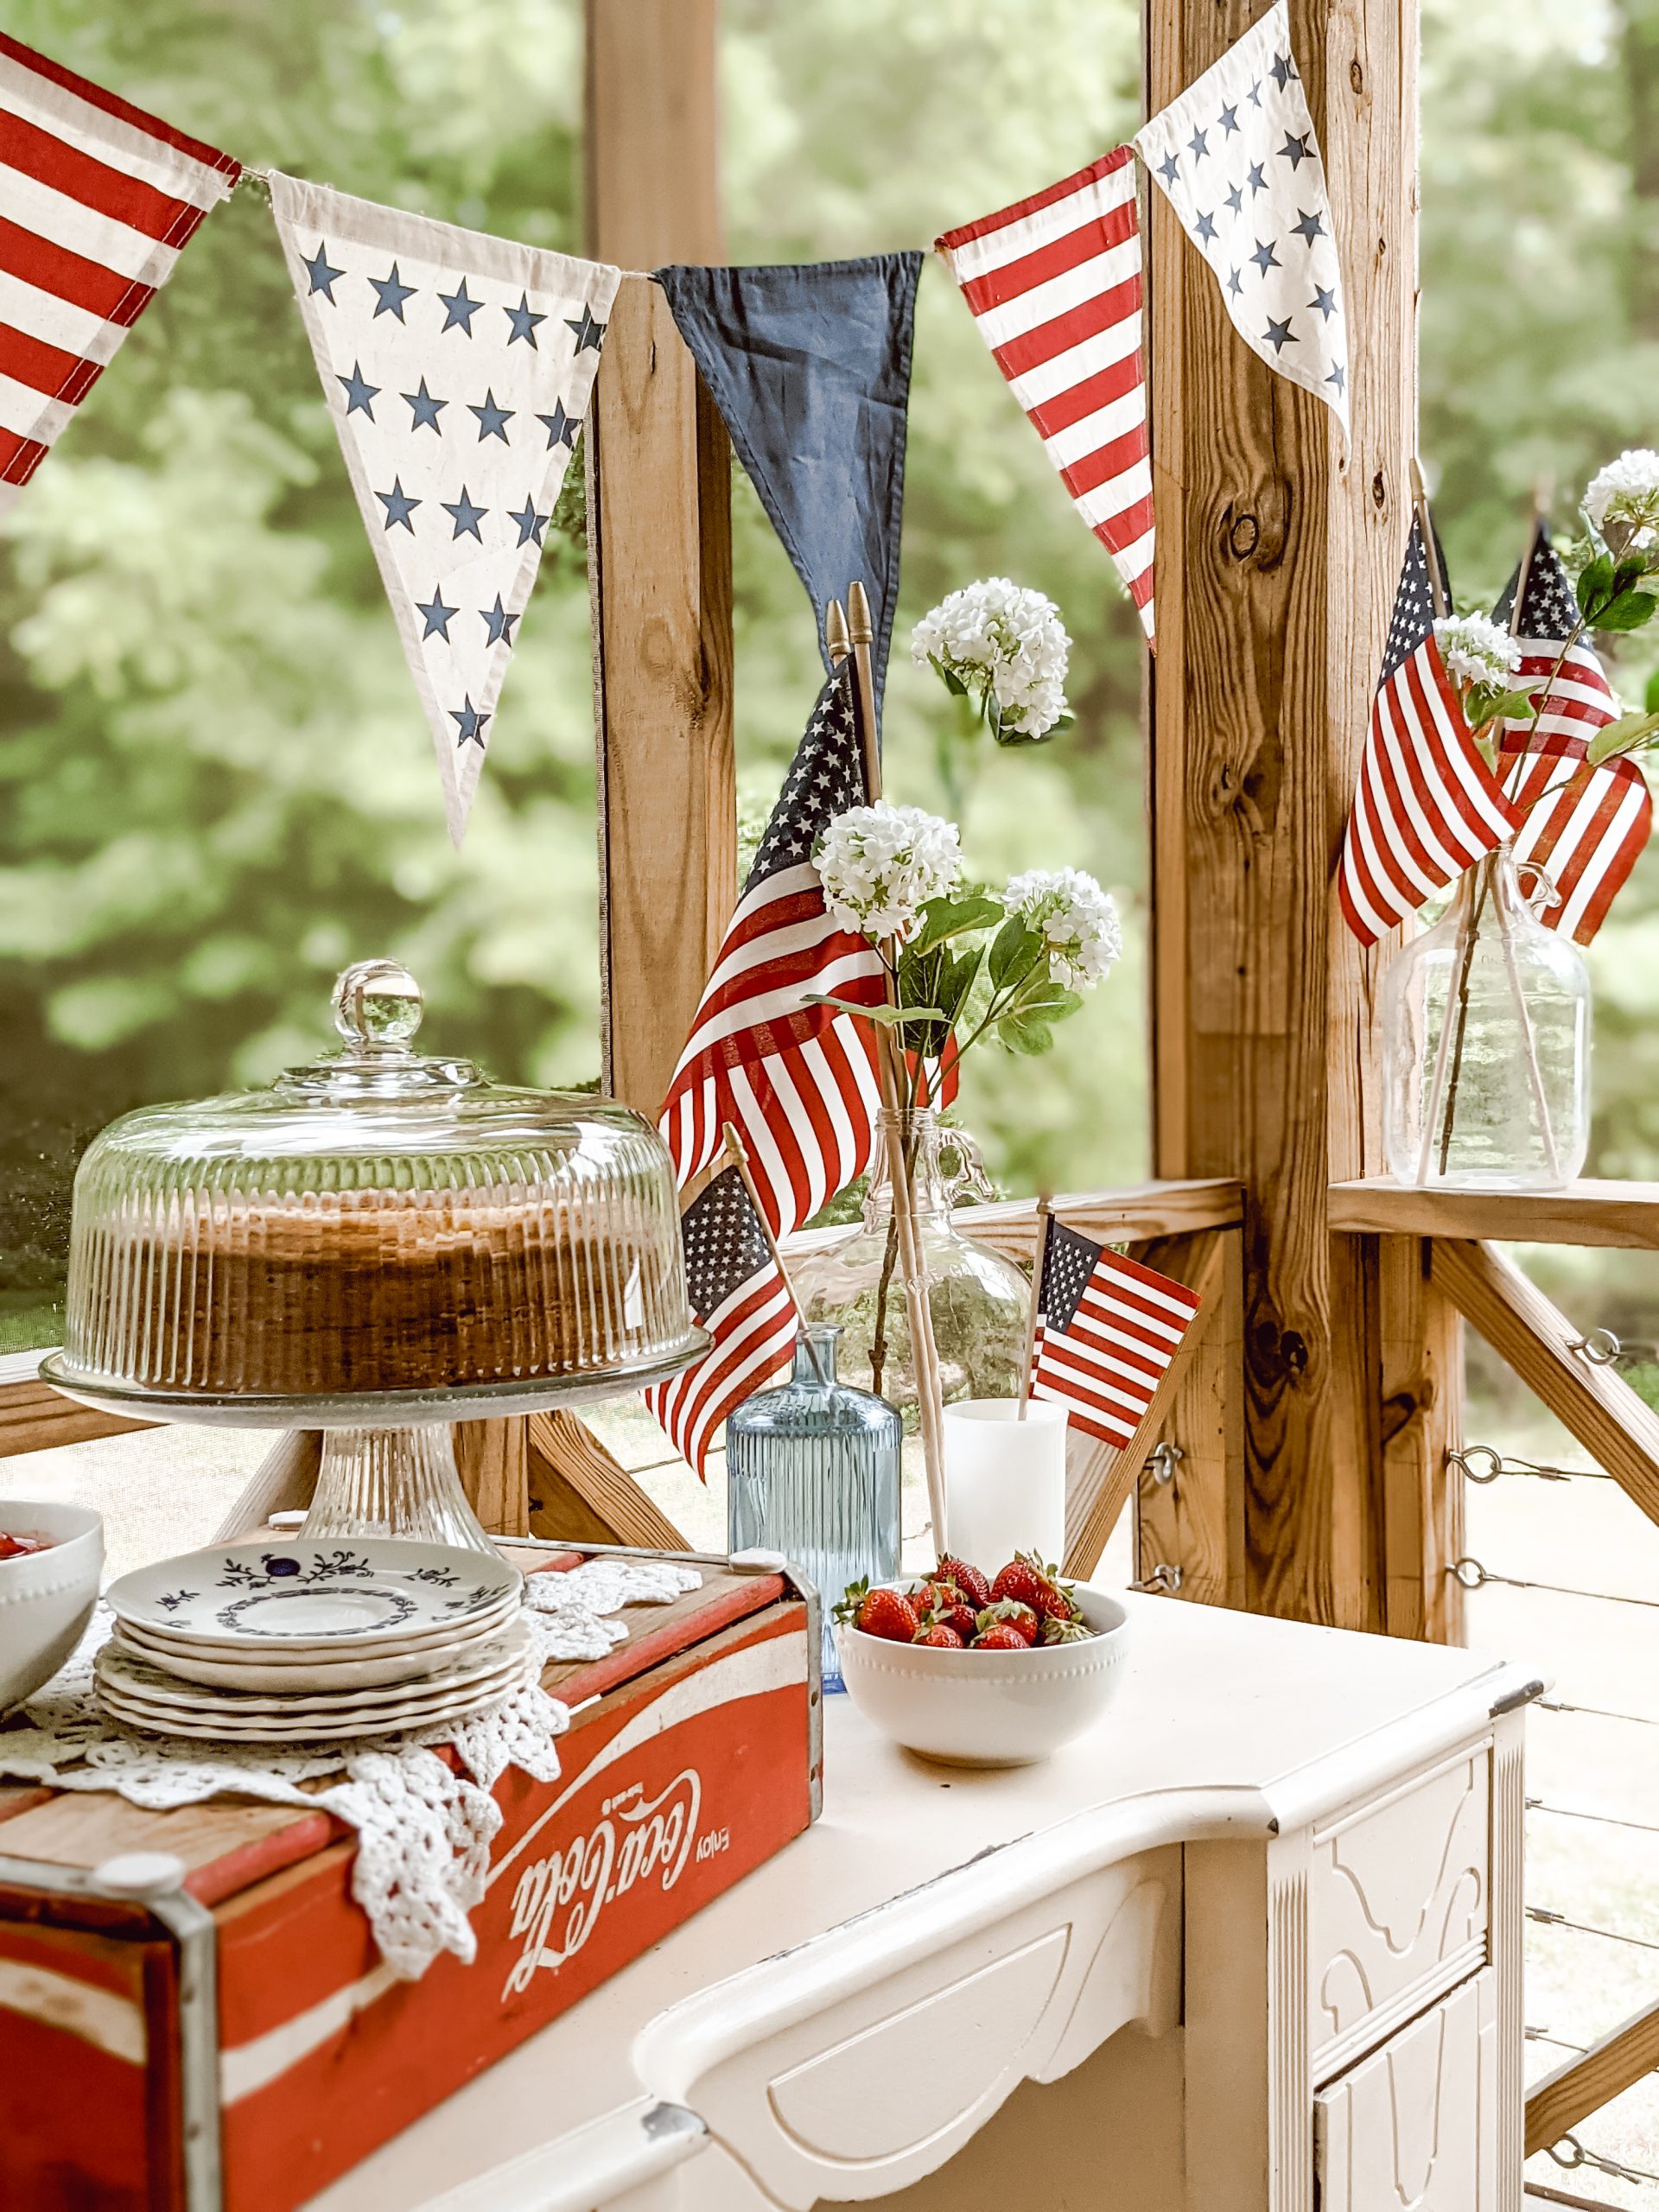 Memorial Day and 4th of July cake table with vintage decor